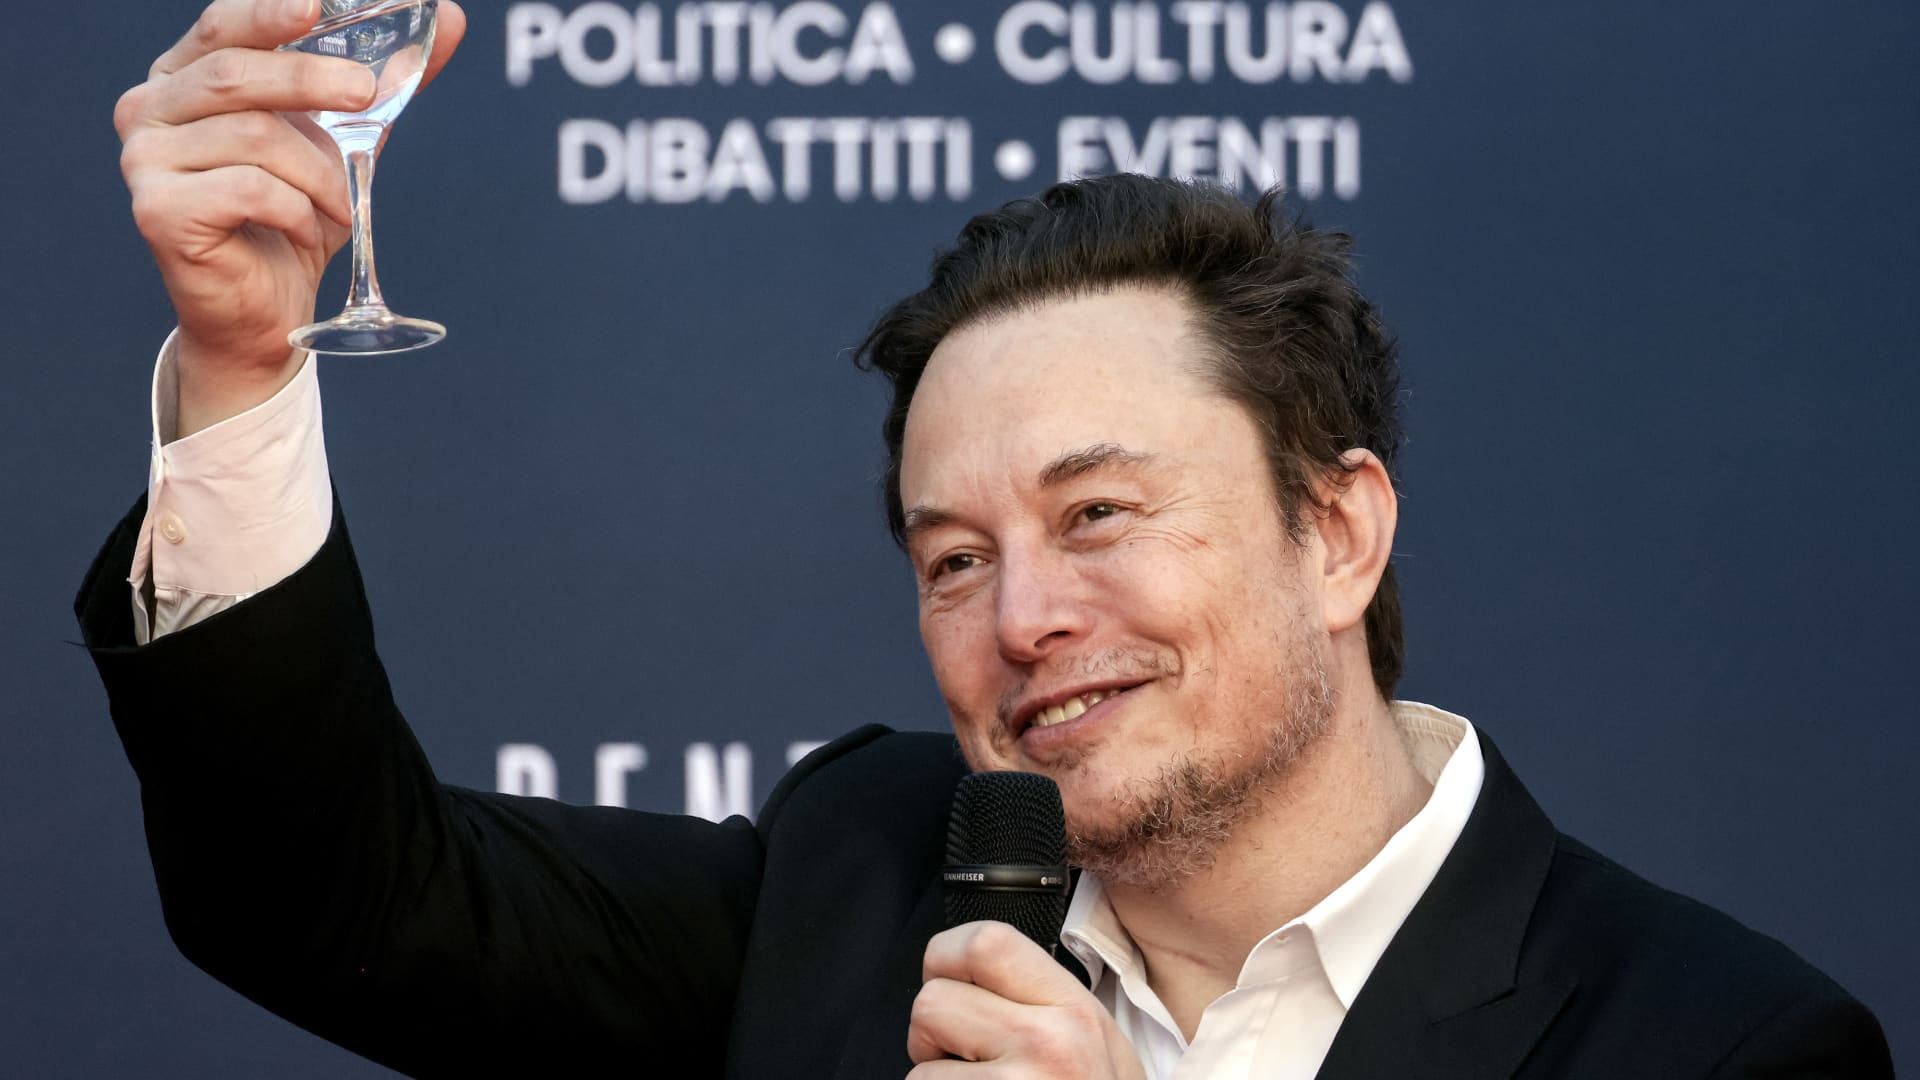 Elon Musk, chief executive officer of Tesla Inc., raises a glass at the Atreju convention in Rome, Italy, on Saturday, Dec. 16, 2023. The annual event, organized by Giorgia Meloni's Brothers of Italy party, began in 1998 as a convention for right-wing youths and has evolved into a political kermesse, including ministers and members of the opposition. Photographer: Alessia Pierdomenico/Bloomberg via Getty Images